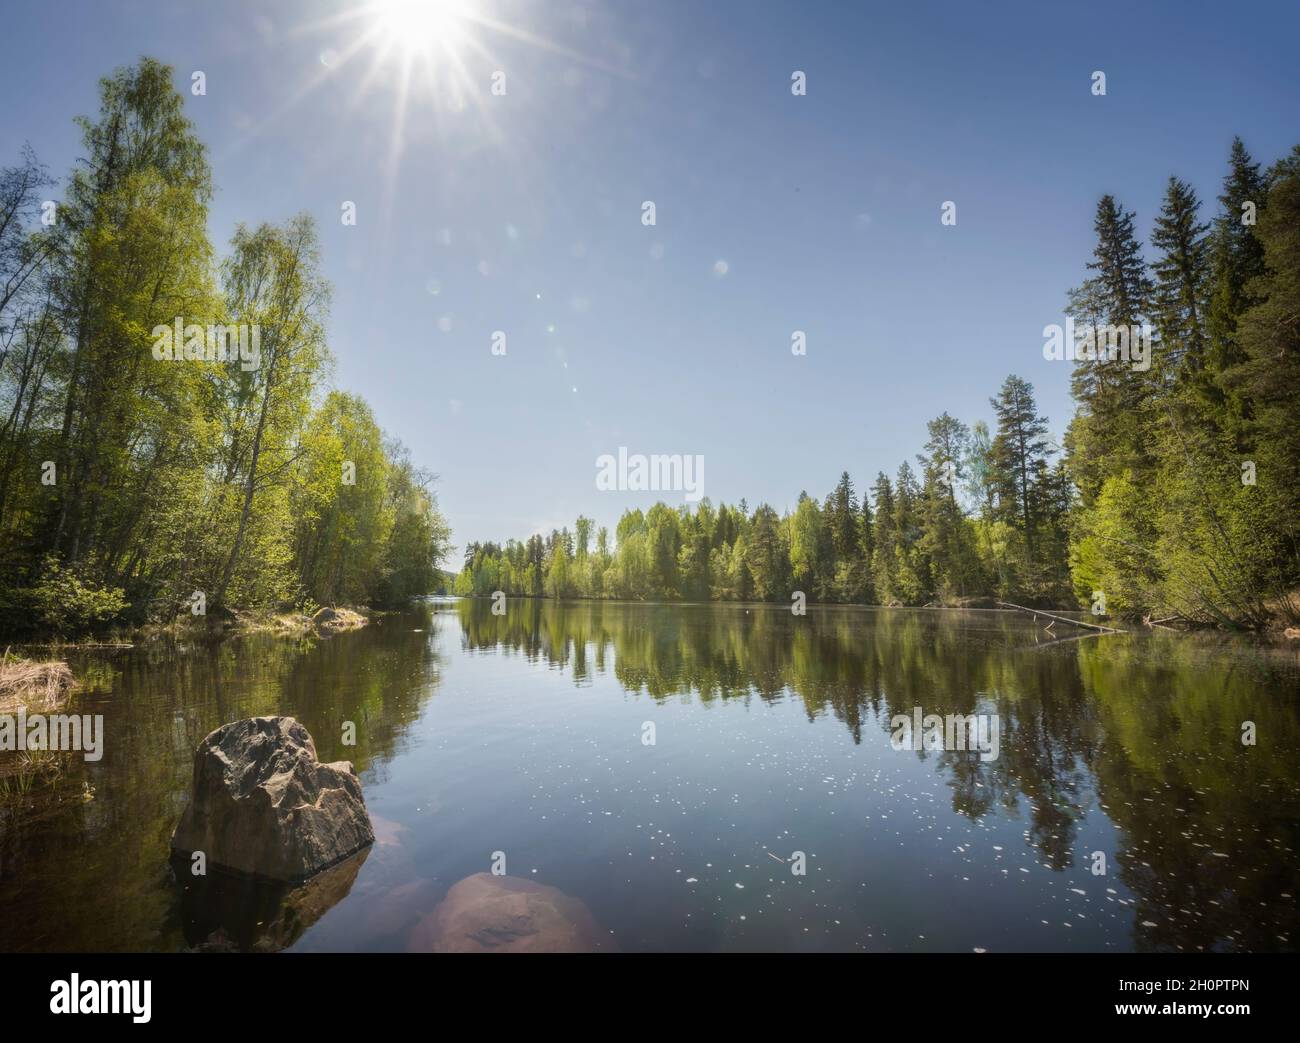 river, boulder and trees in an forest landscape Stock Photo